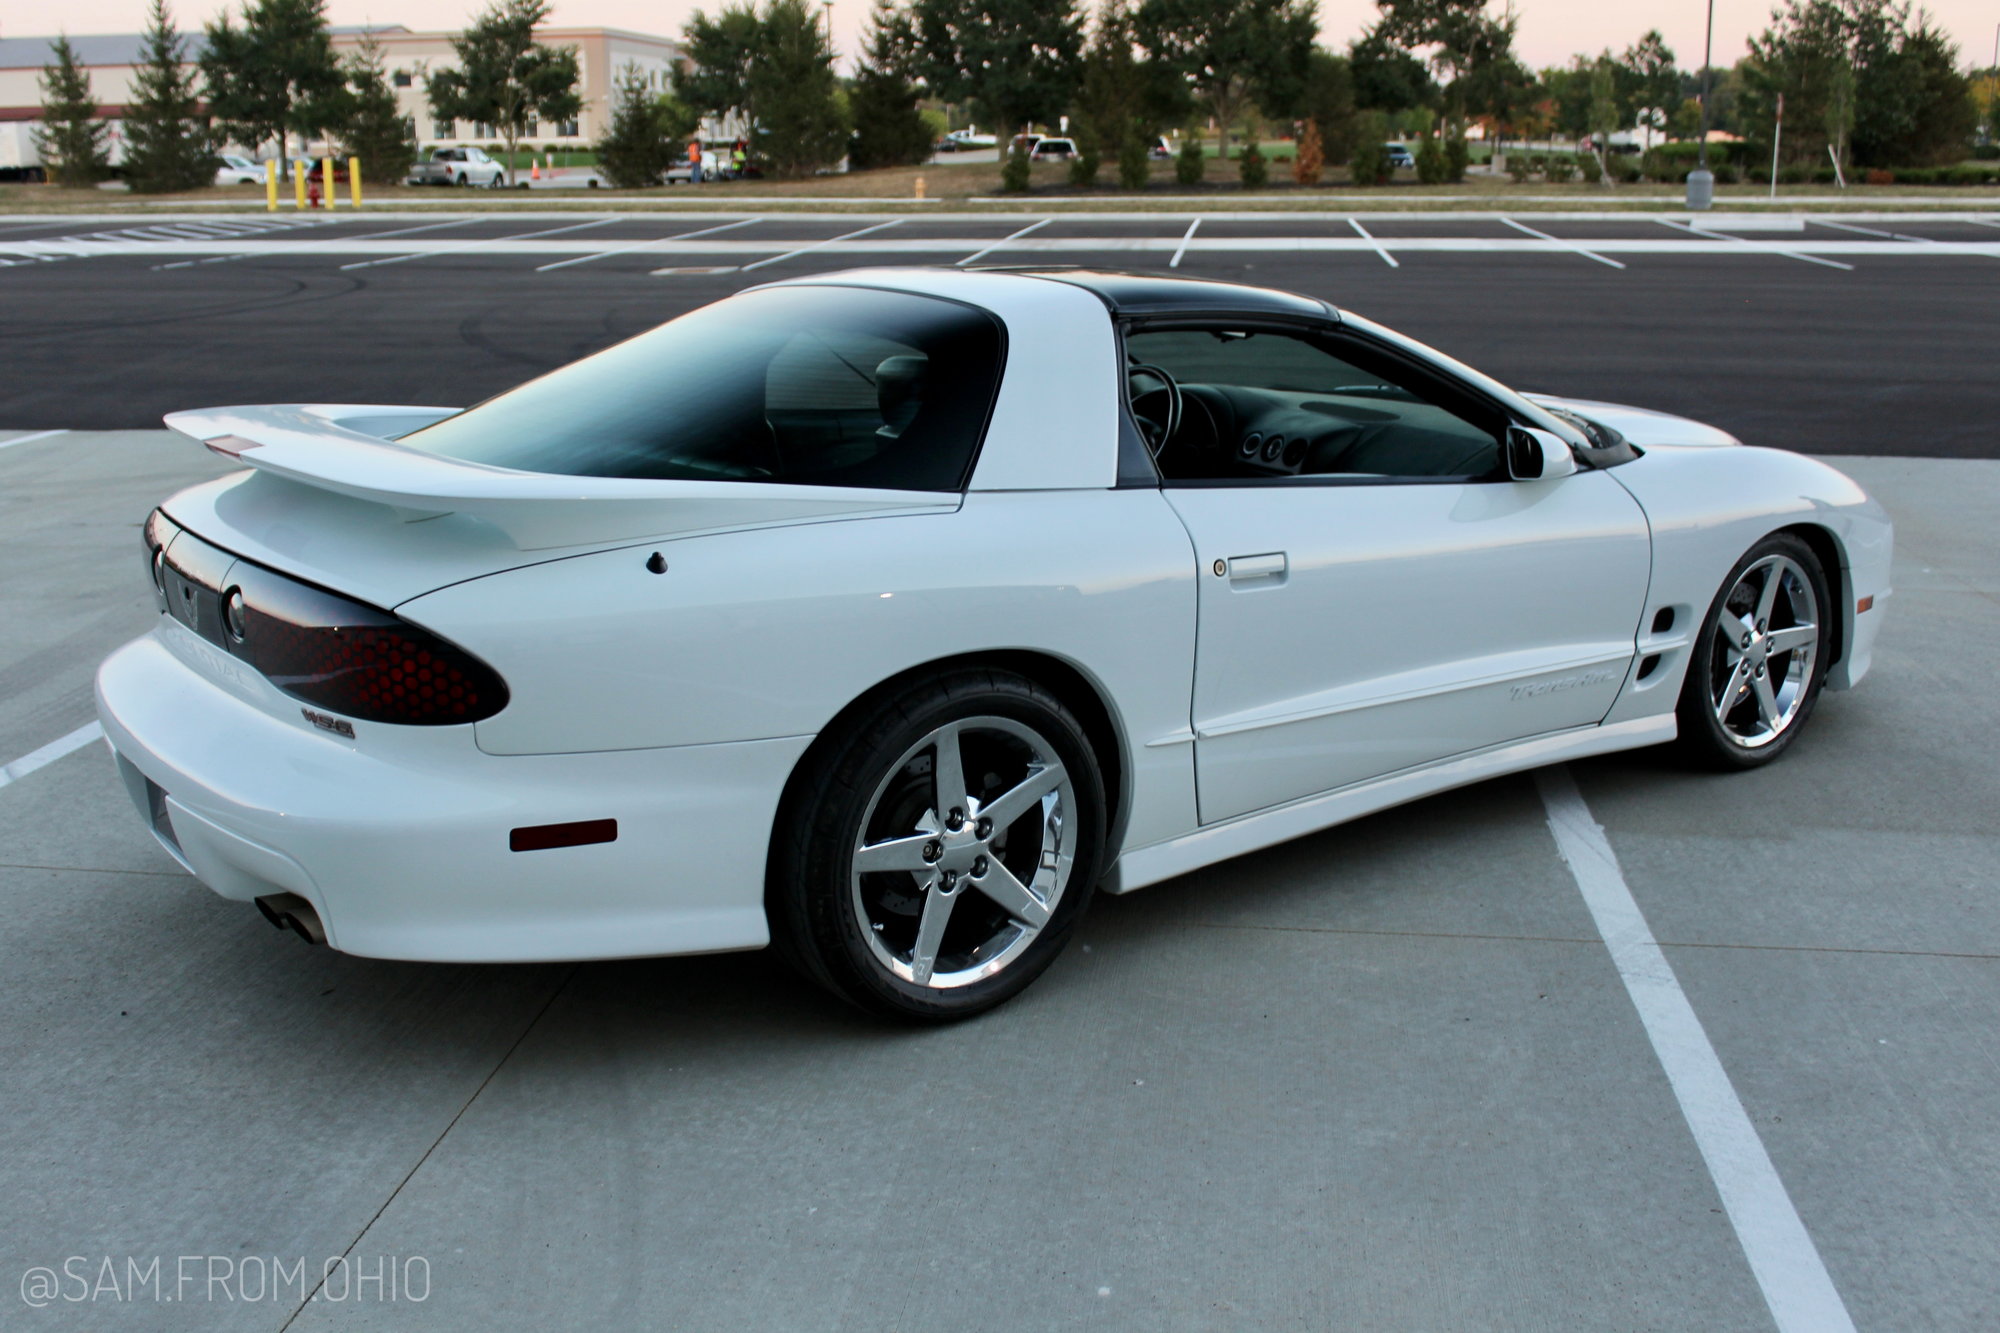 2000 Pontiac Firebird - procharged t56 ws6 white - Used - VIN 2g2fv22gxy2175567 - 86,000 Miles - 8 cyl - 2WD - Manual - Coupe - White - Dayton, OH 45424, United States